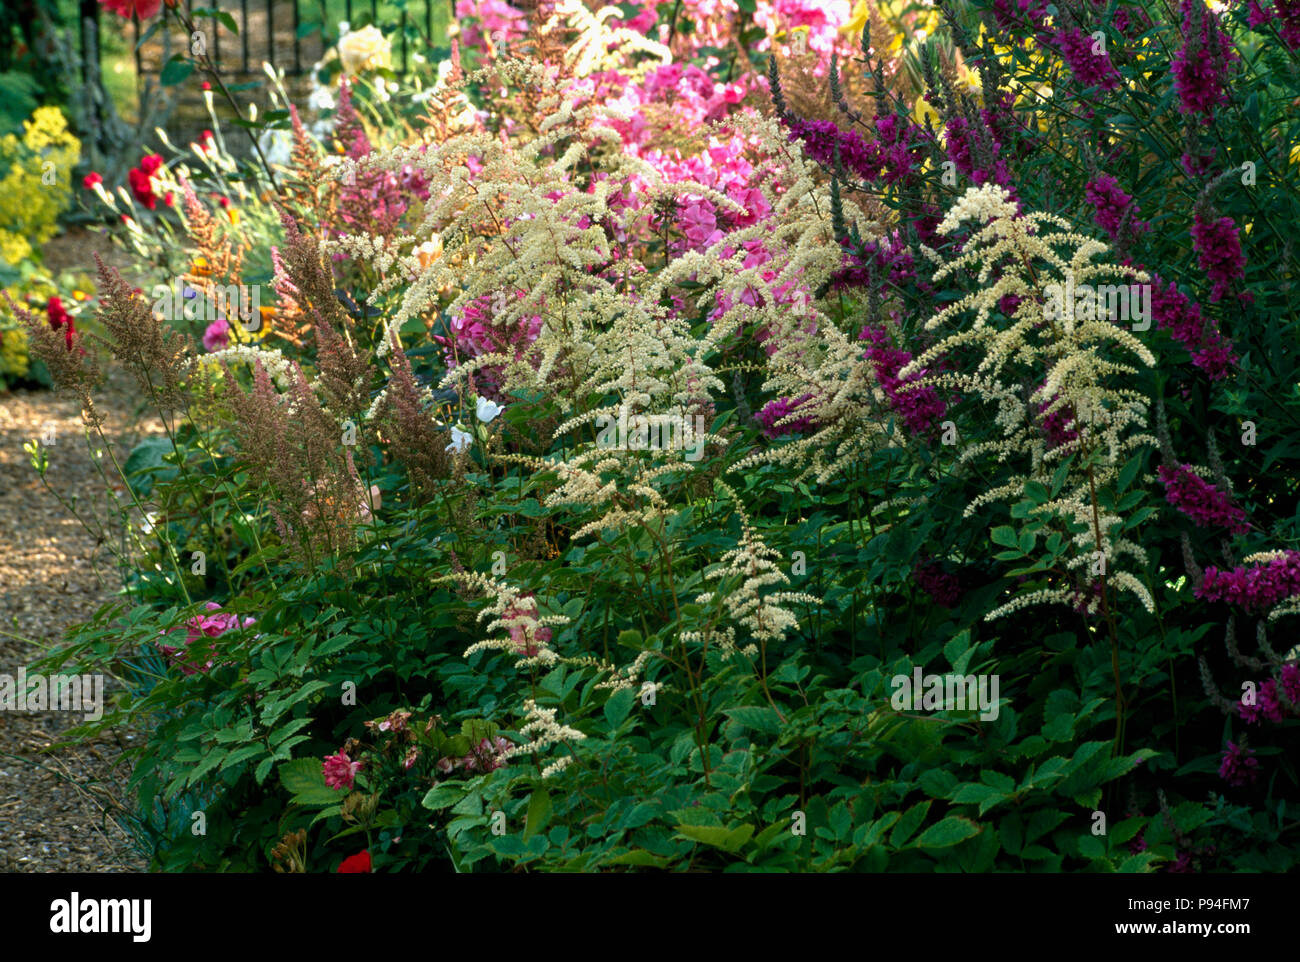 Aruncus Sylvester growing in summer border in front of pink Phlox Stock Photo